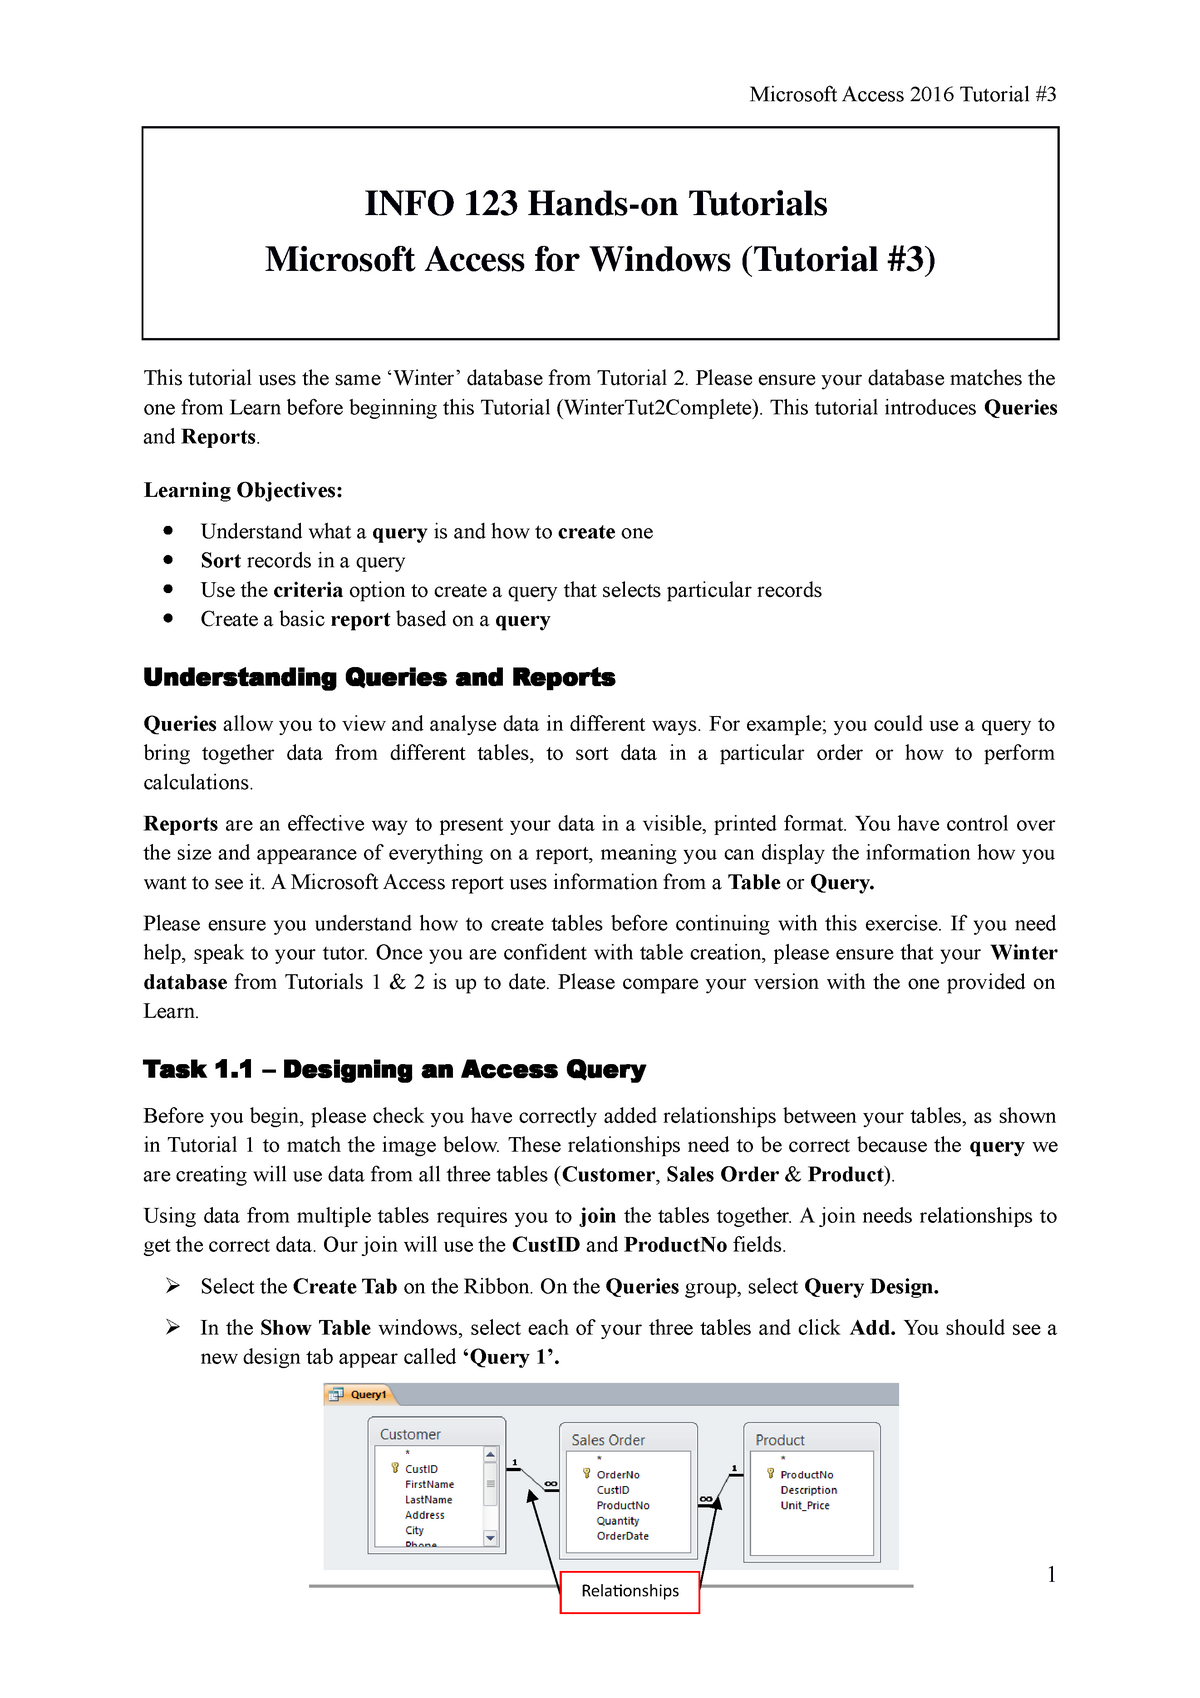 Access Tutorial 3 - INFO 123 Hands-on Tutorials Microsoft Access for ...